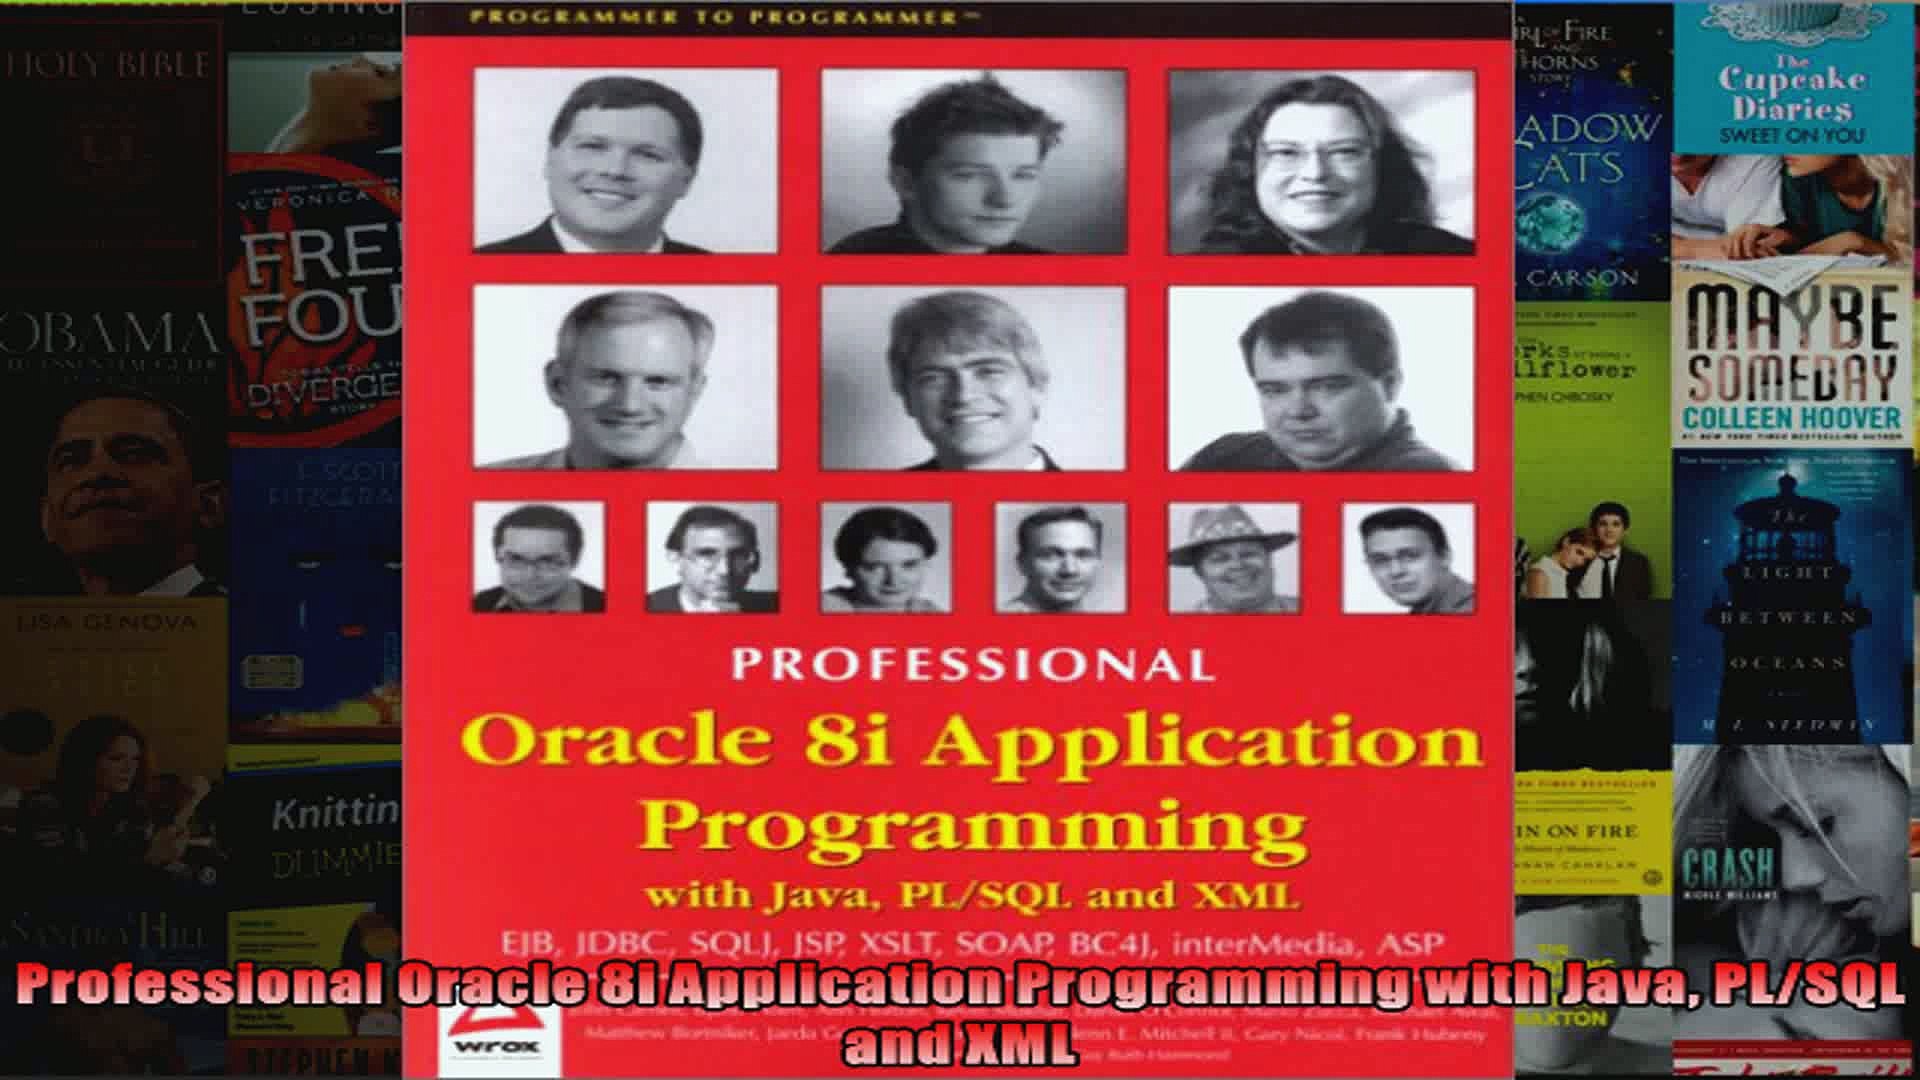 Professional Oracle 8i Application Programming with Java PLSQL and XML